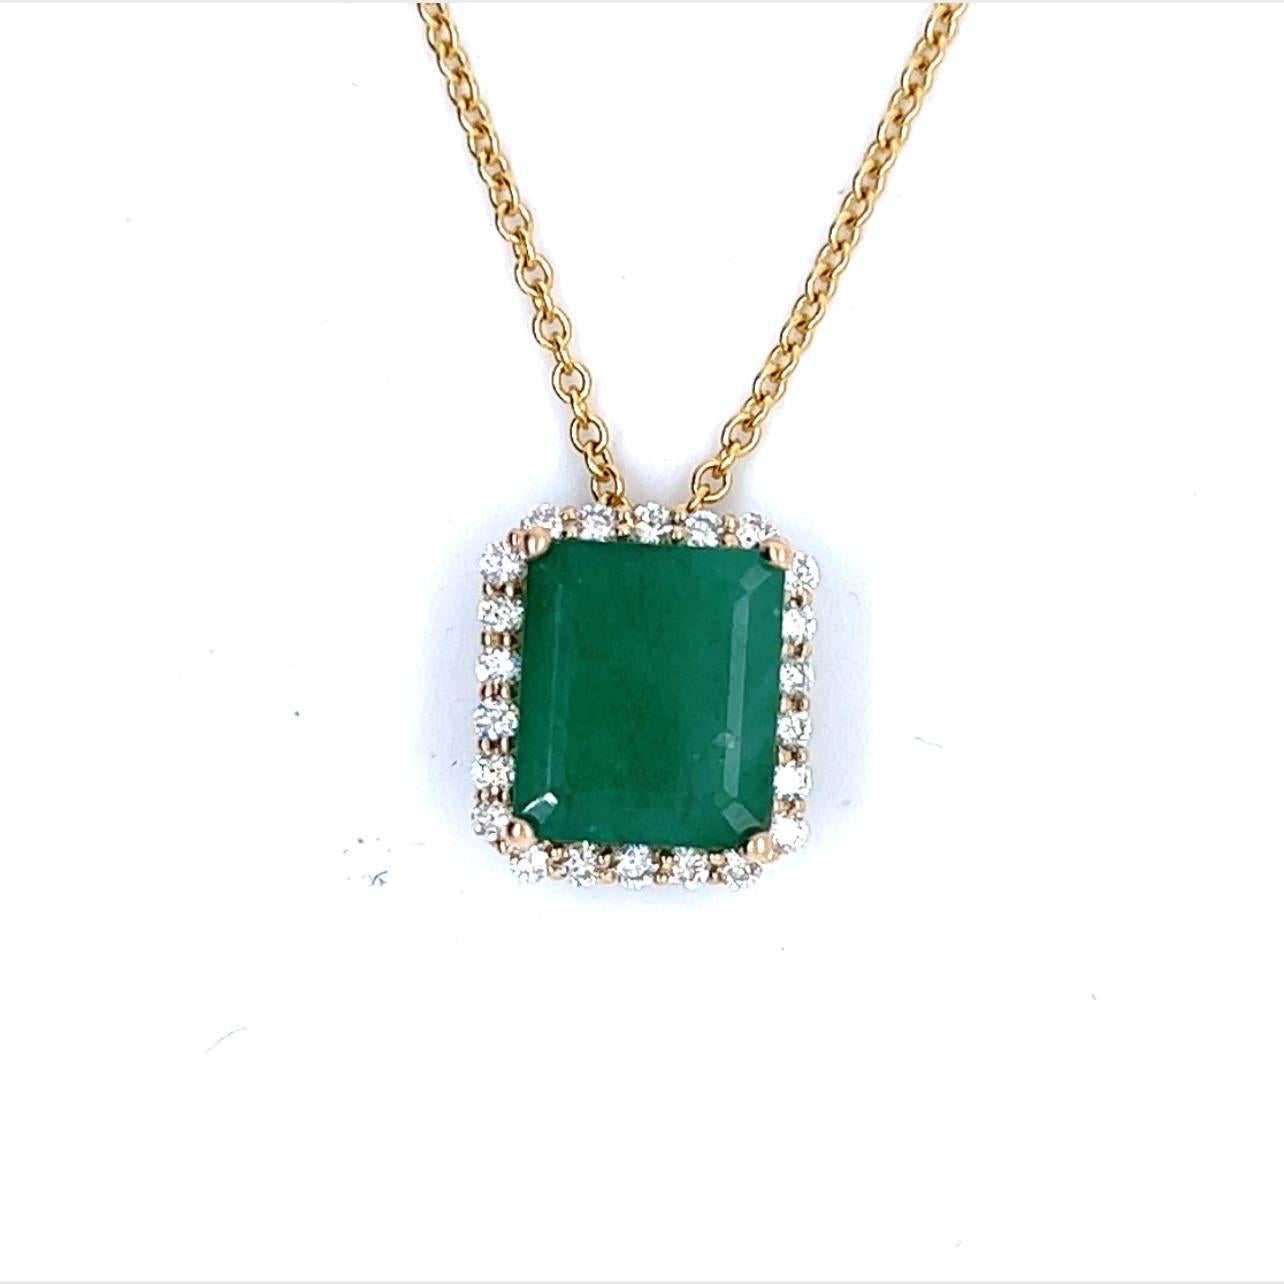 Women's Natural Emerald Diamond Pendant Necklace 14k Yellow Gold 5.05 TCW Certified For Sale